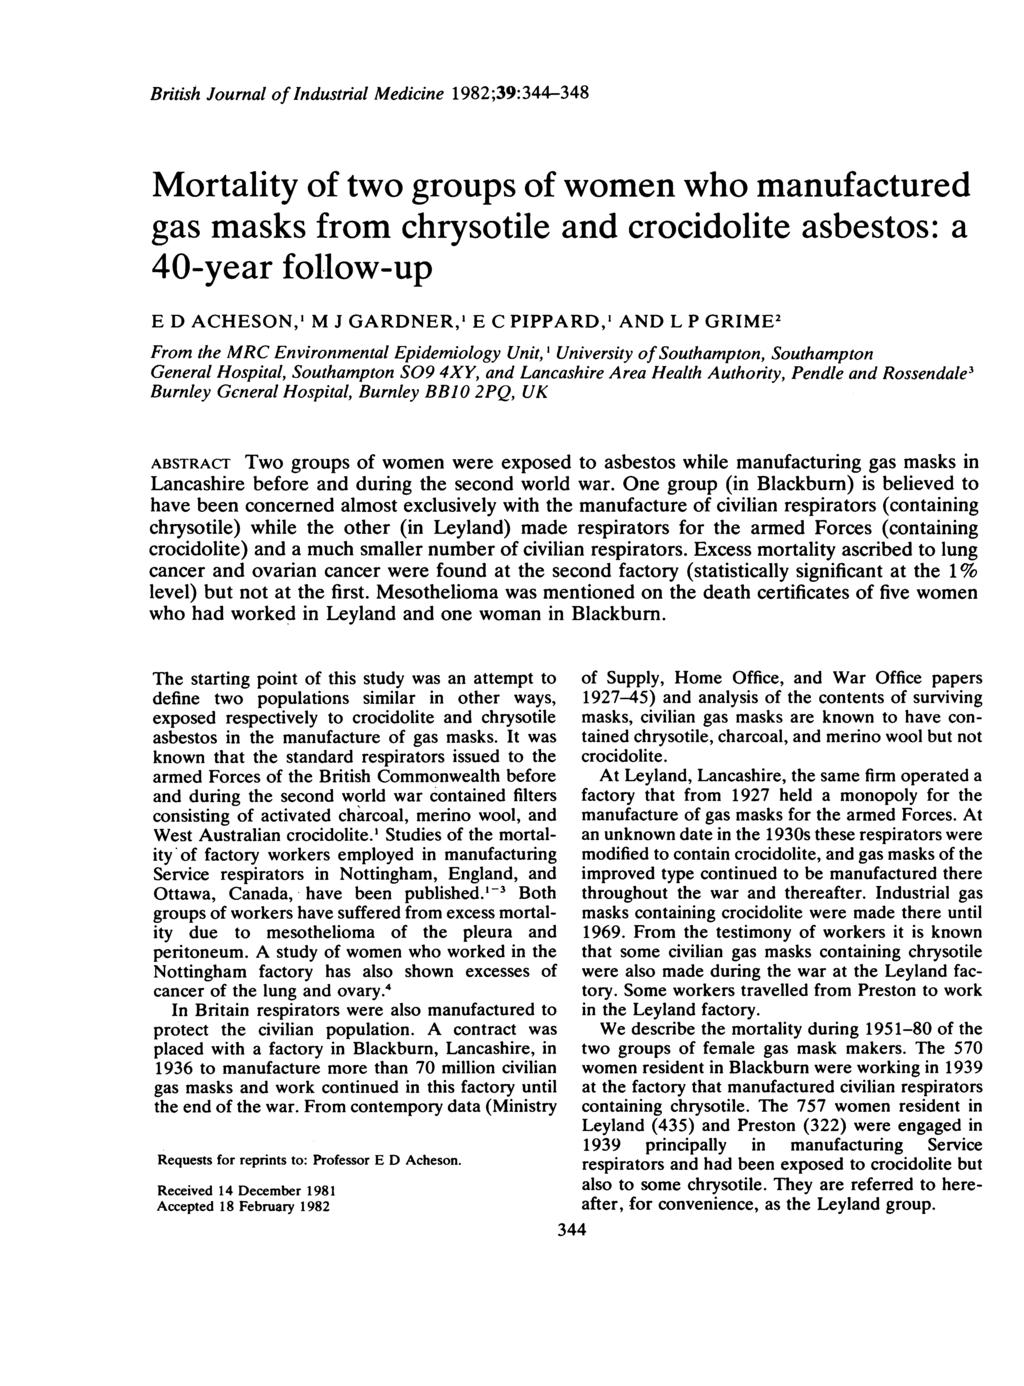 British Journal of Industrial Medicine 1982;39:344-348 Mortality of two groups of women who manufactured gas masks from chrysotile and crocidolite asbestos: a 4-year follow-up E D ACHESON,' M J